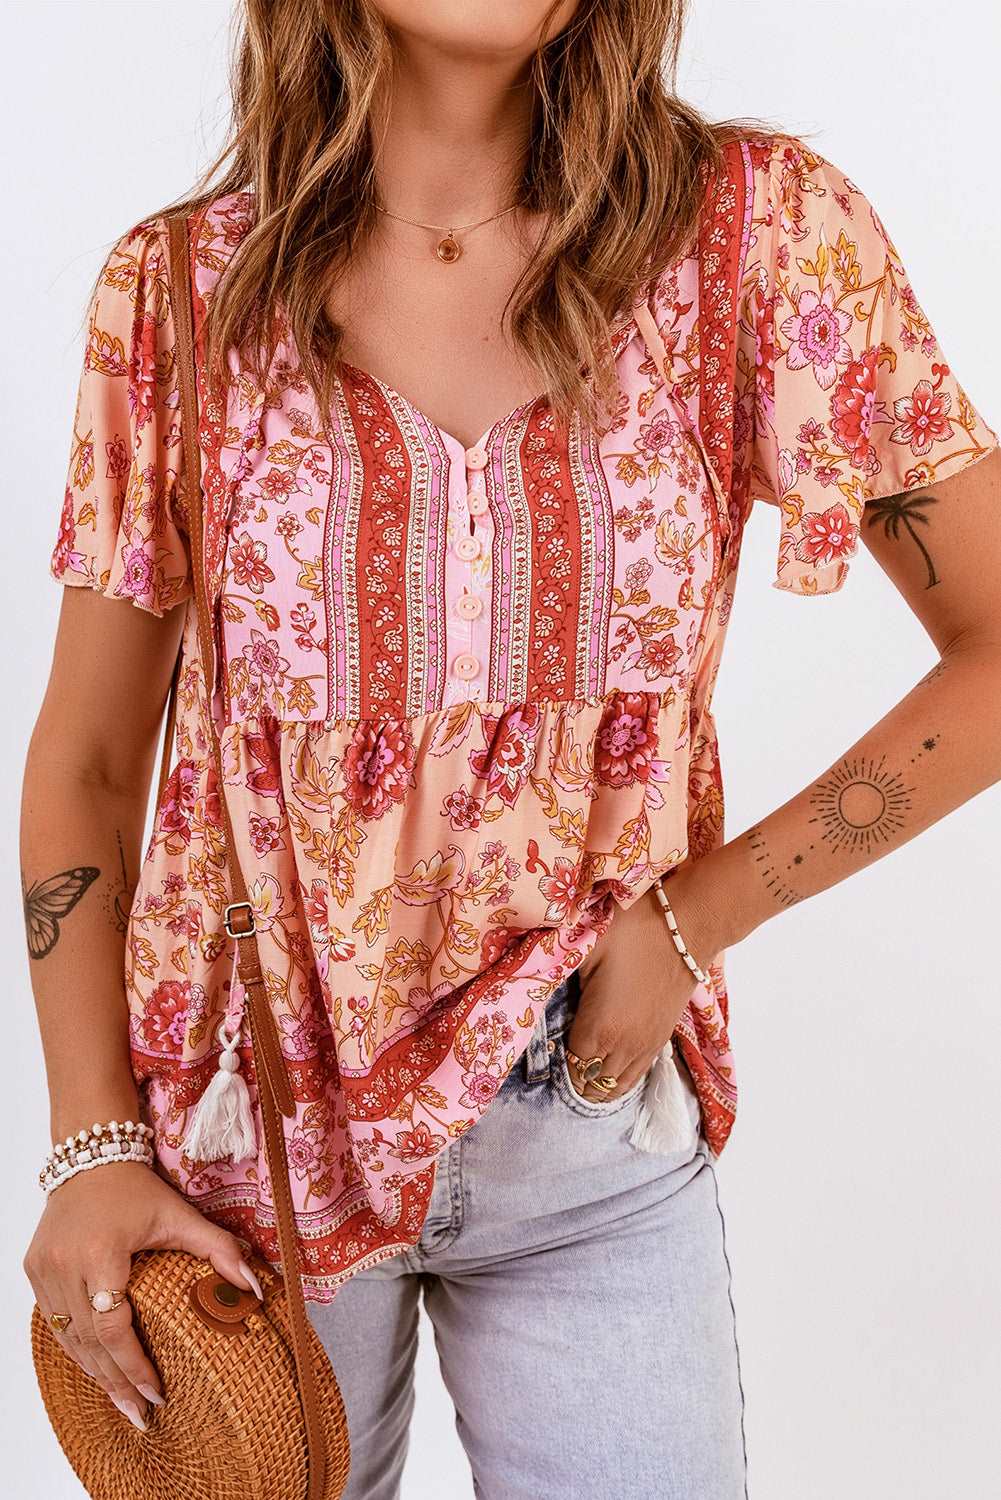 Bohemian Blouse with Floral Print Red 2XL